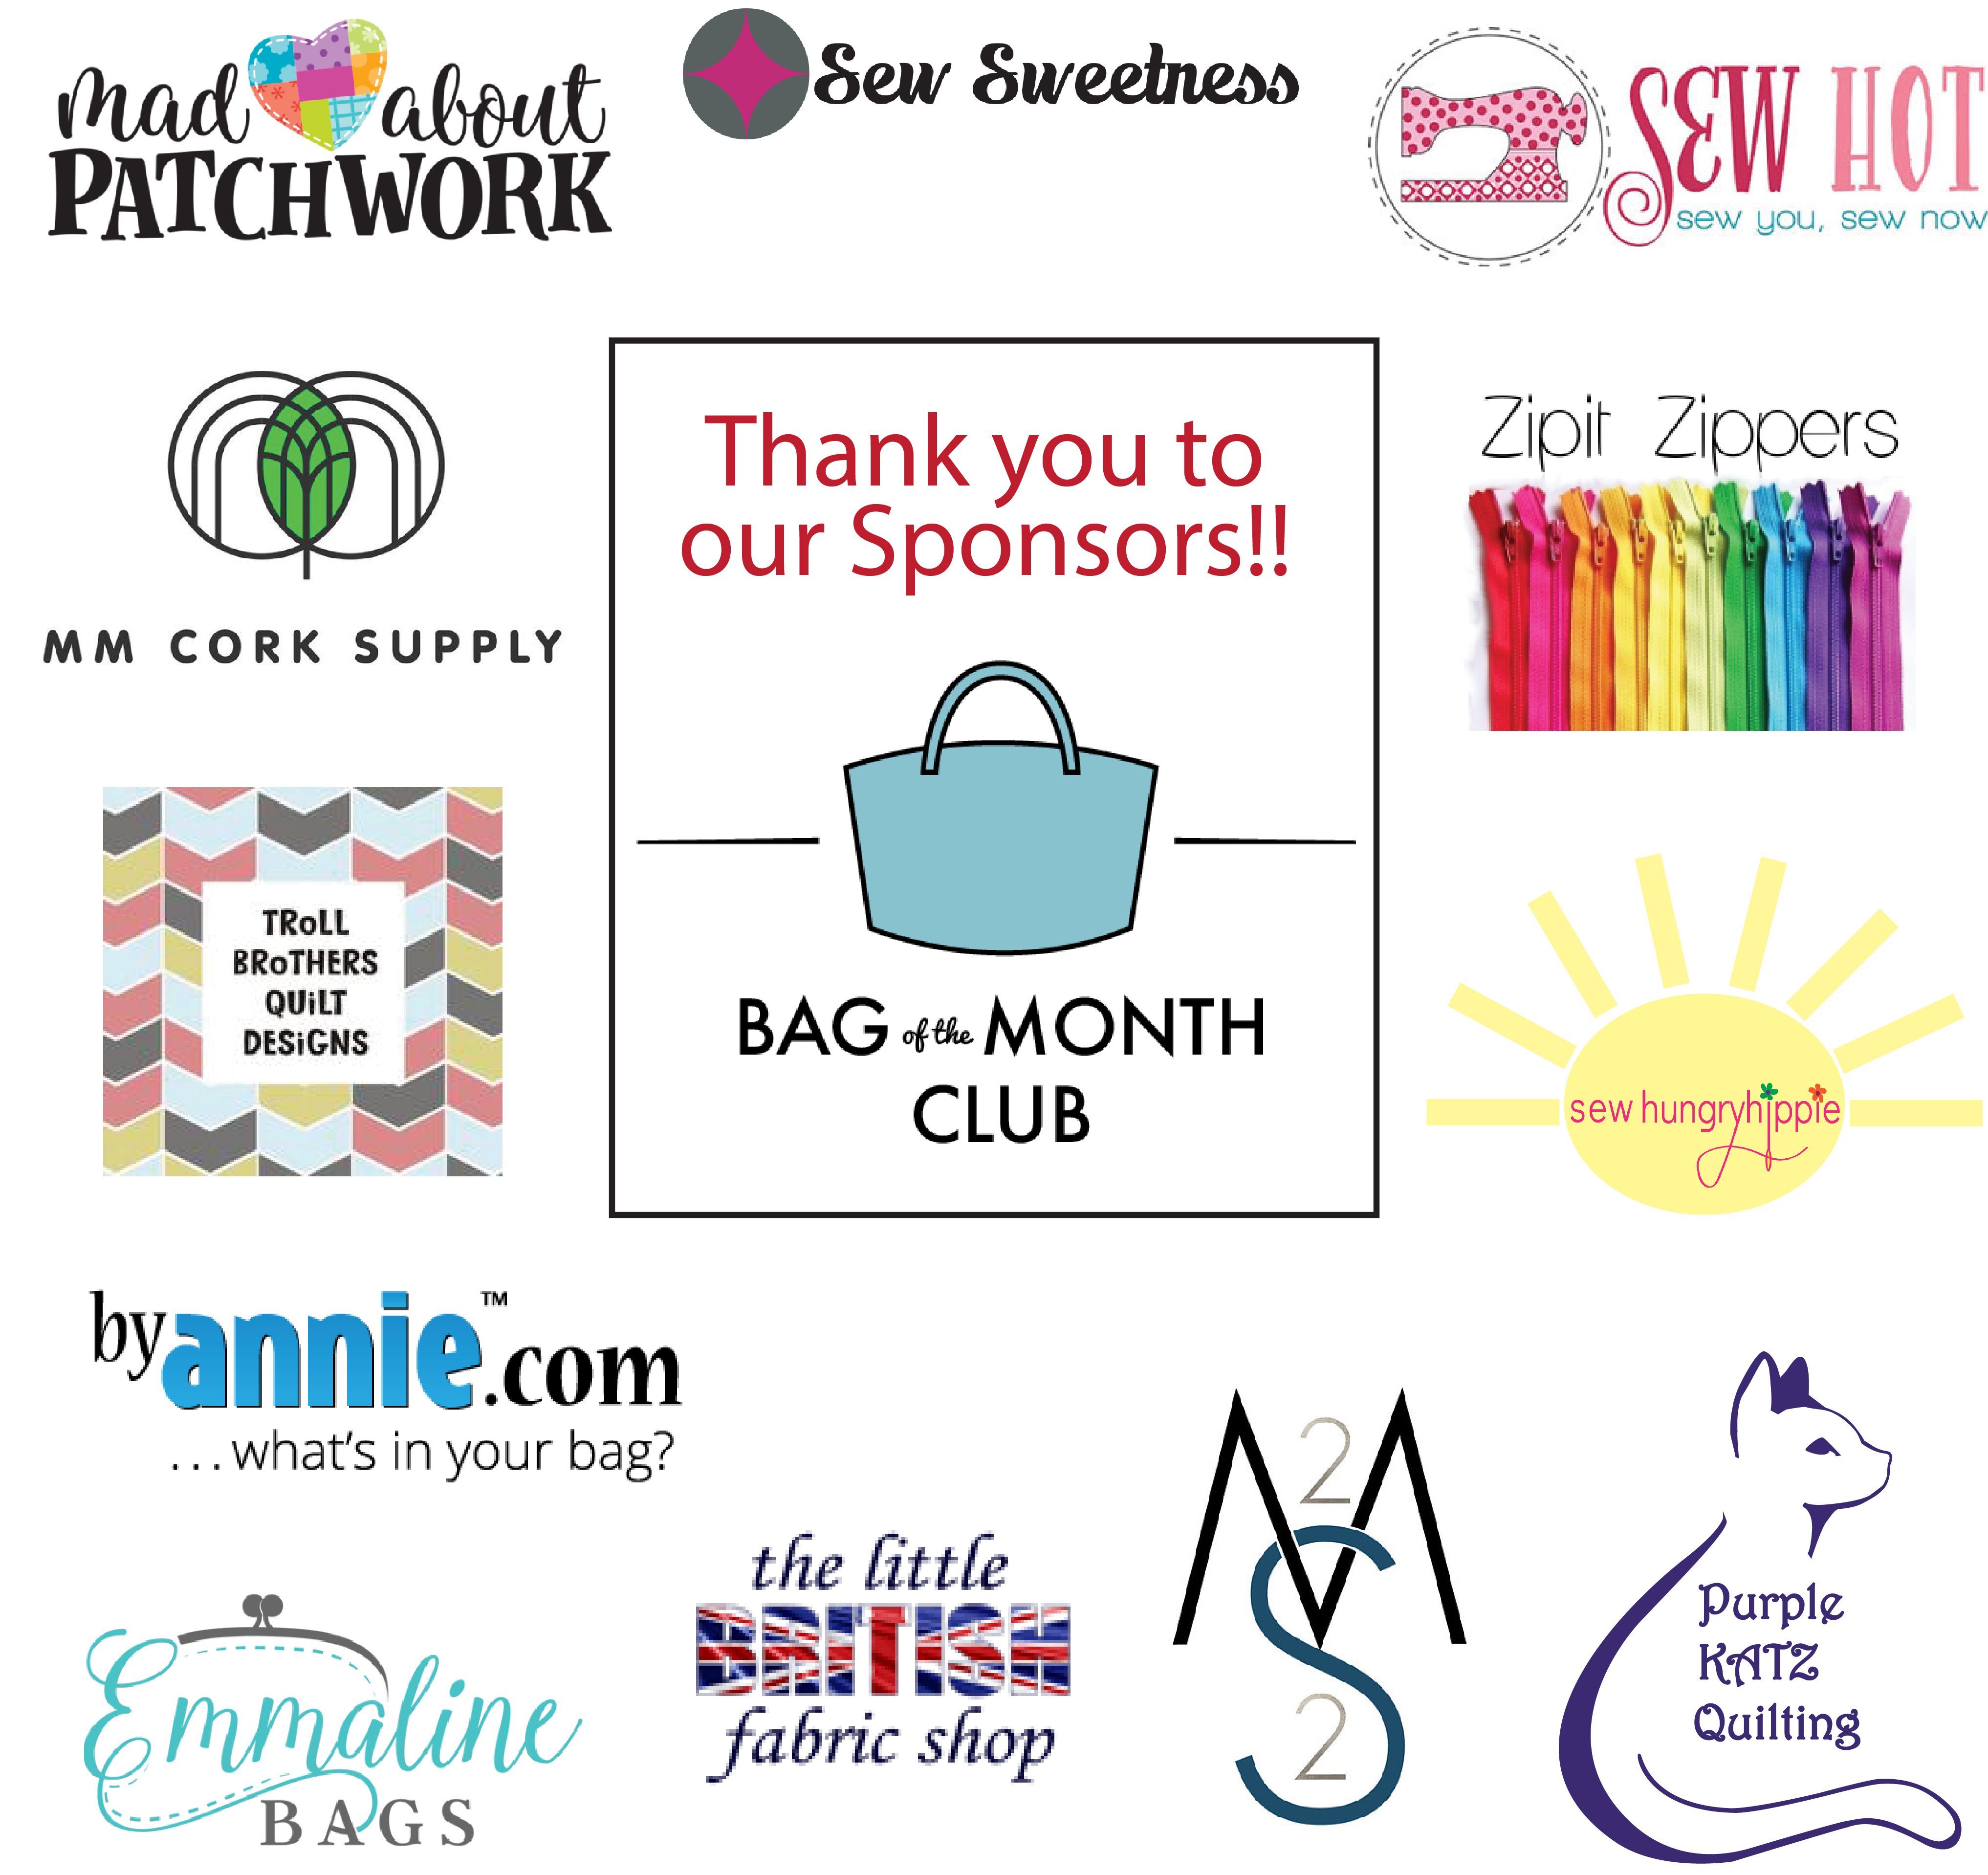 Competition Sponsors for Bag of the Month Club